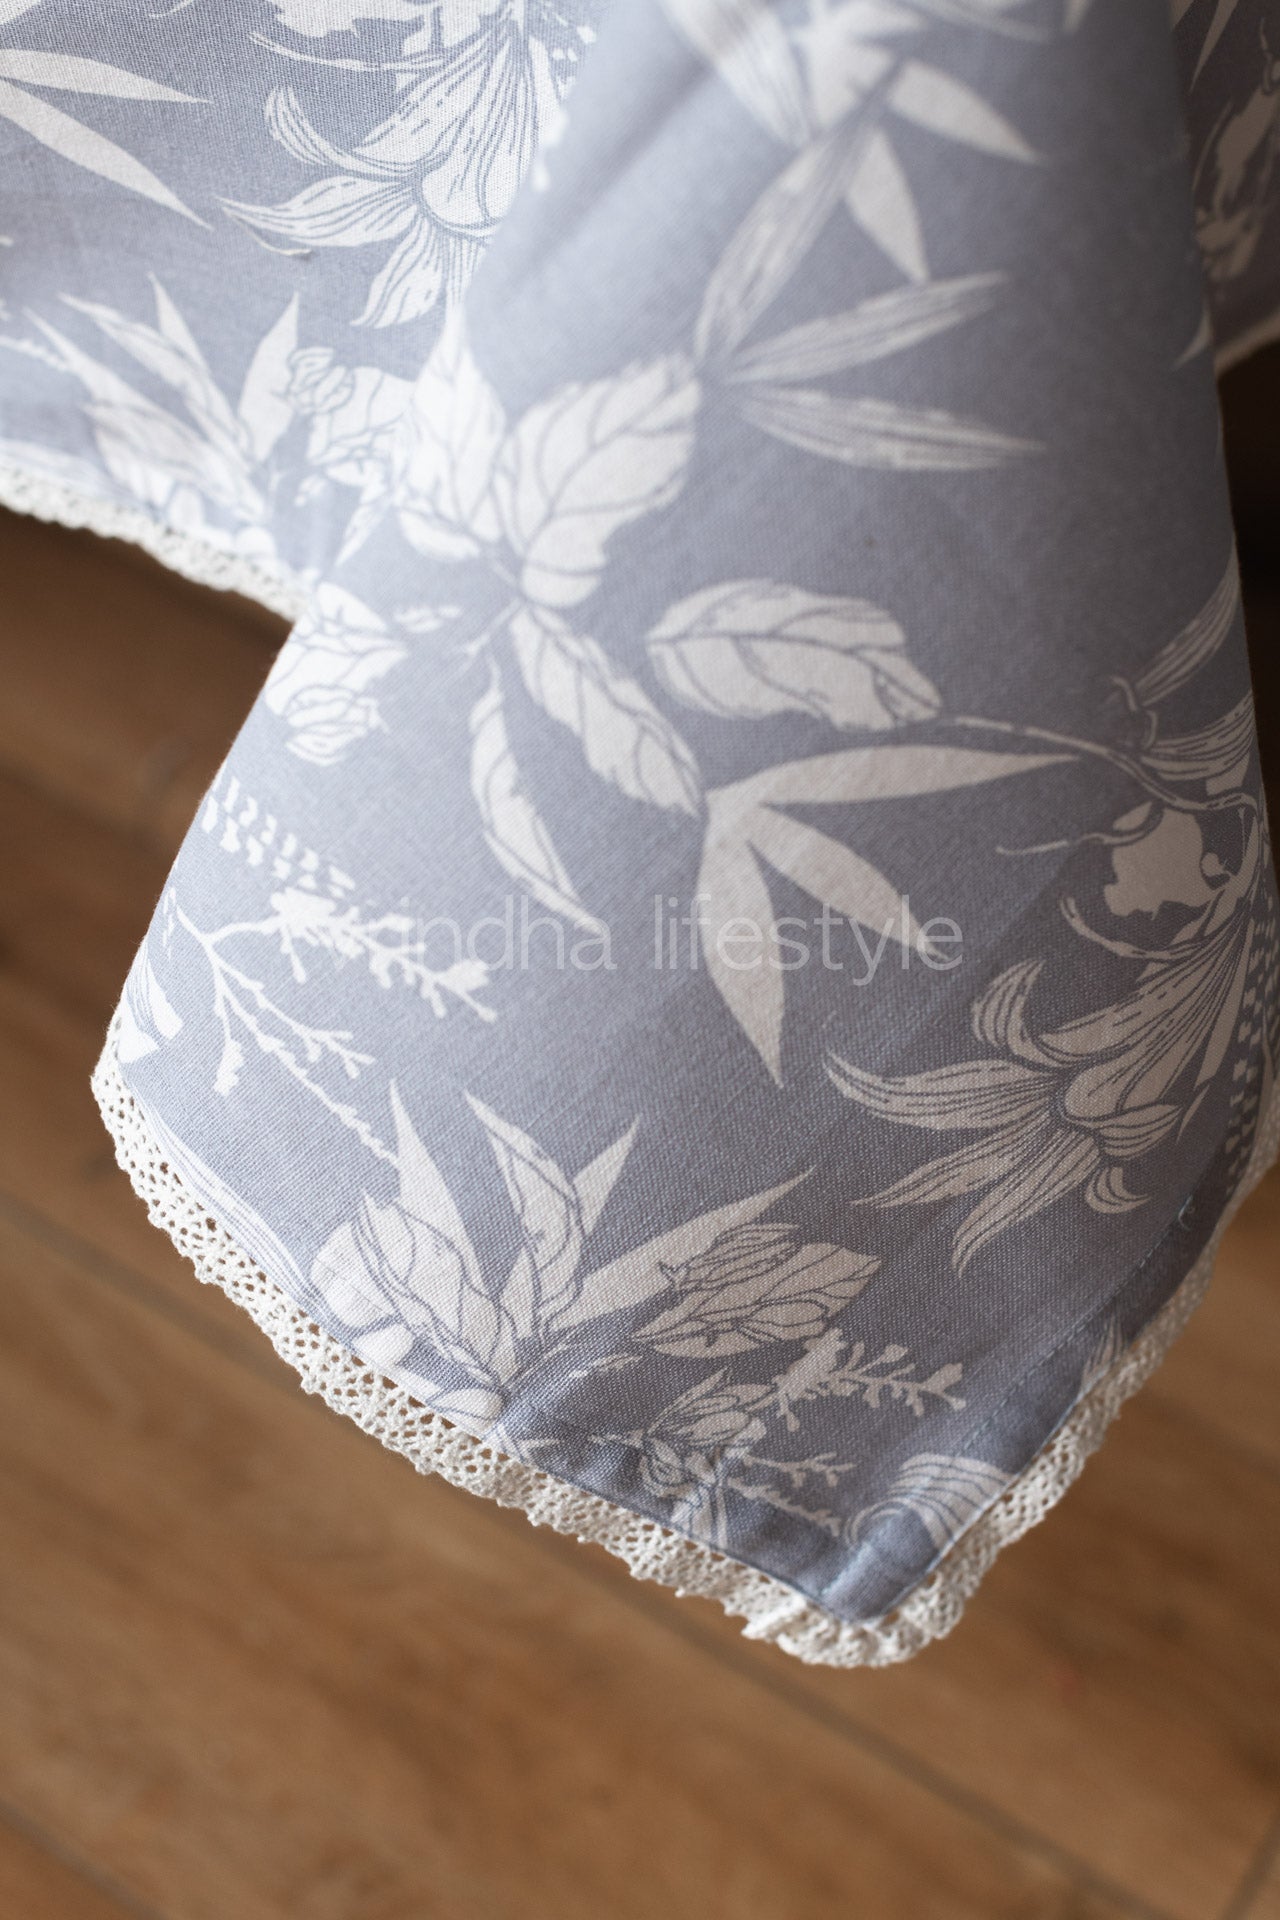 Cotton floral print table cloth with lace detailing-6/8 seater